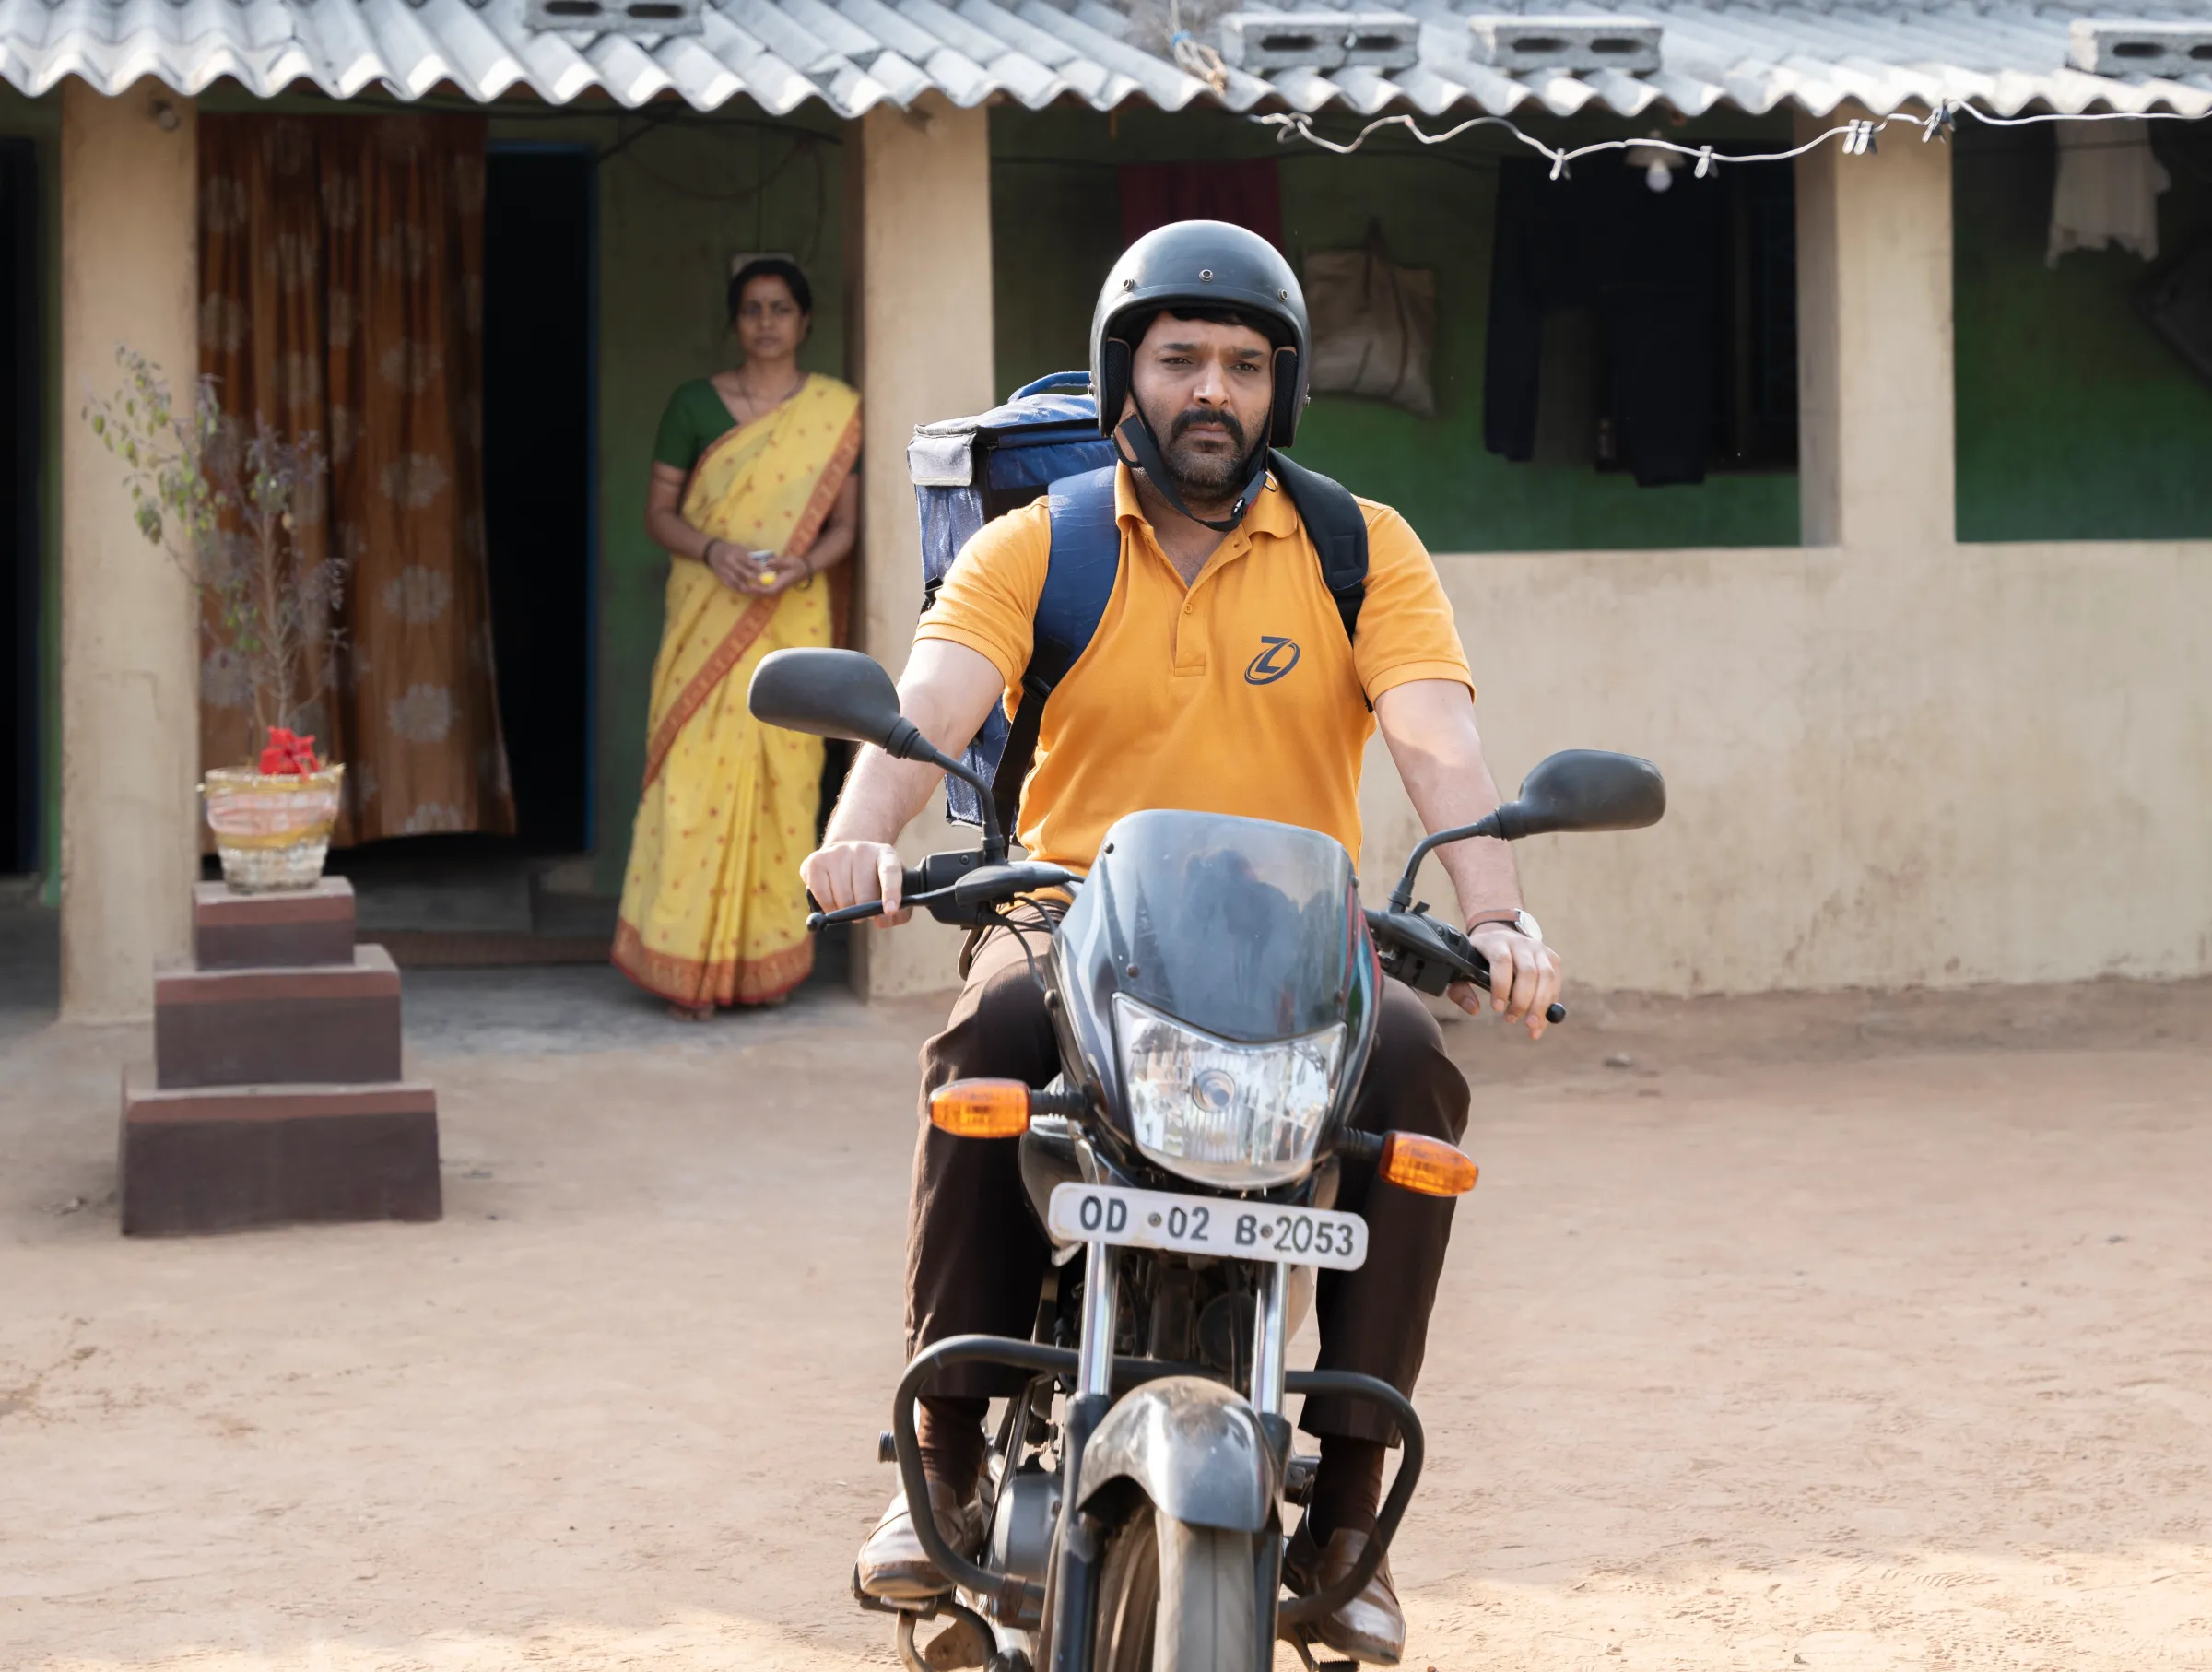 A still image of a man on his scooter from the Bollywood film 'Zwigato' starring Kapil Sharma, that tells the story of a food-delivery app driver's struggle in the eastern city of Bhubaneswar, India. Applause Entertainment/Handout via Thomson Reuters Foundation